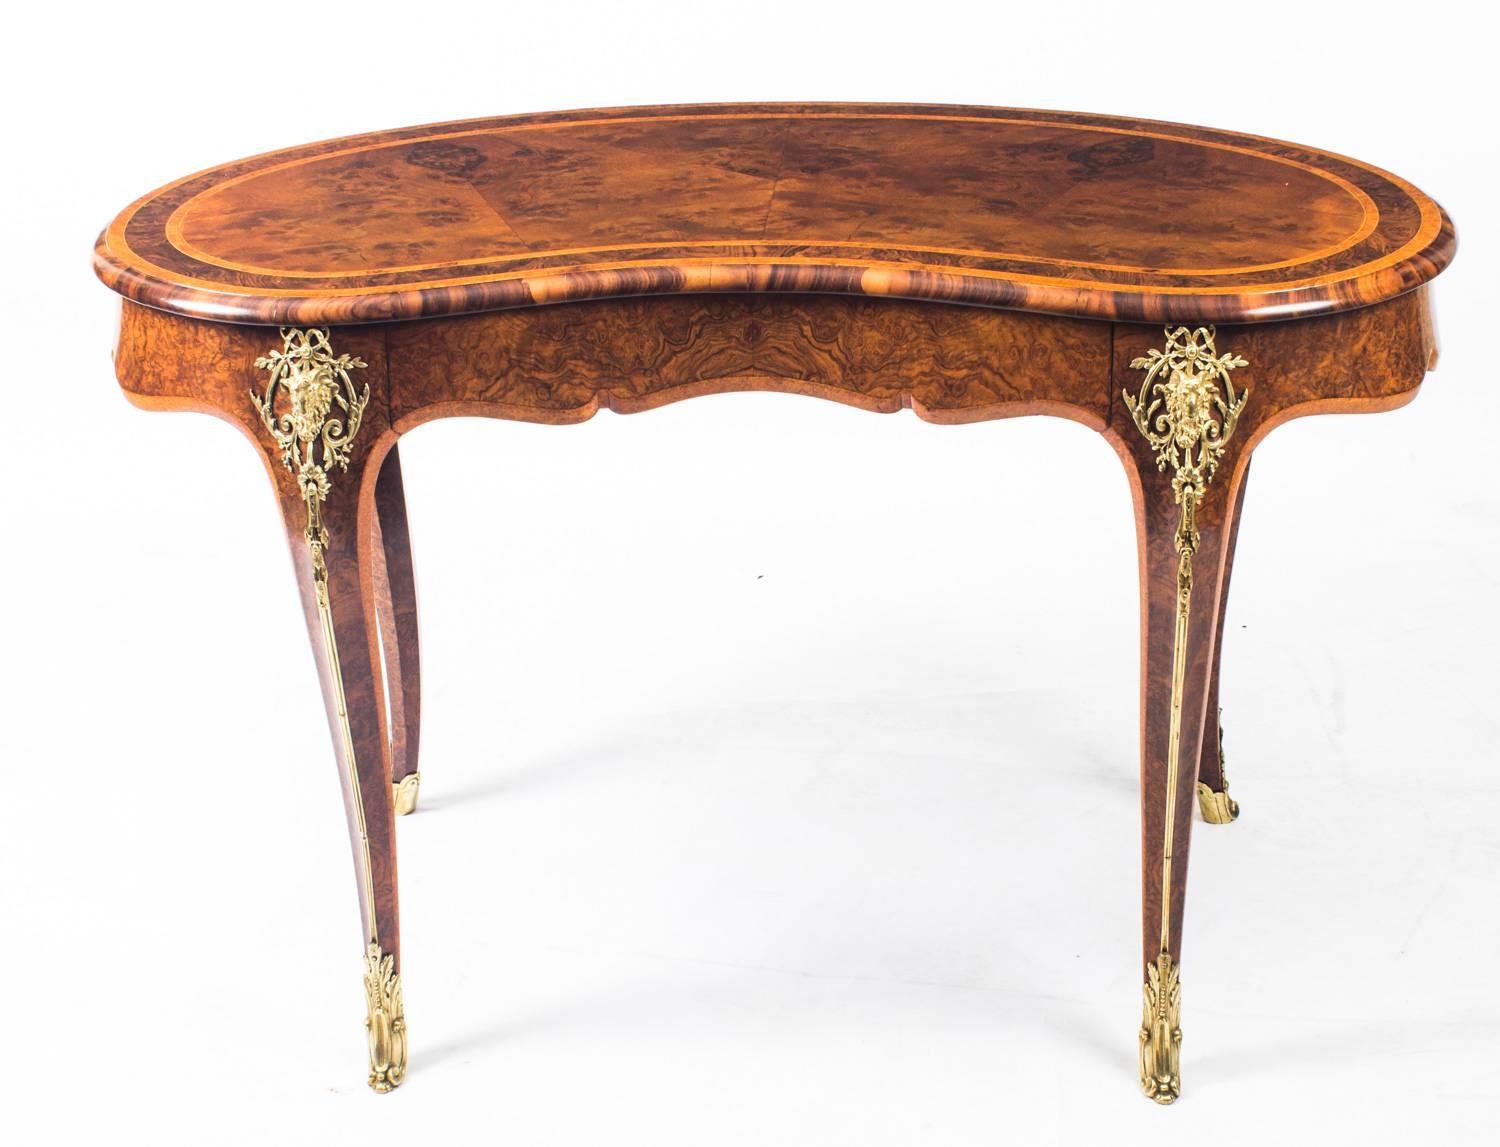 This is a fabulous quality antique burr walnut and amboyna kidney shaped writing table, circa 1850 in date.

The writing table features fabulous decorative ormolu mounts, amboyna crossbanded decoration and a single drawer that is stamped with the